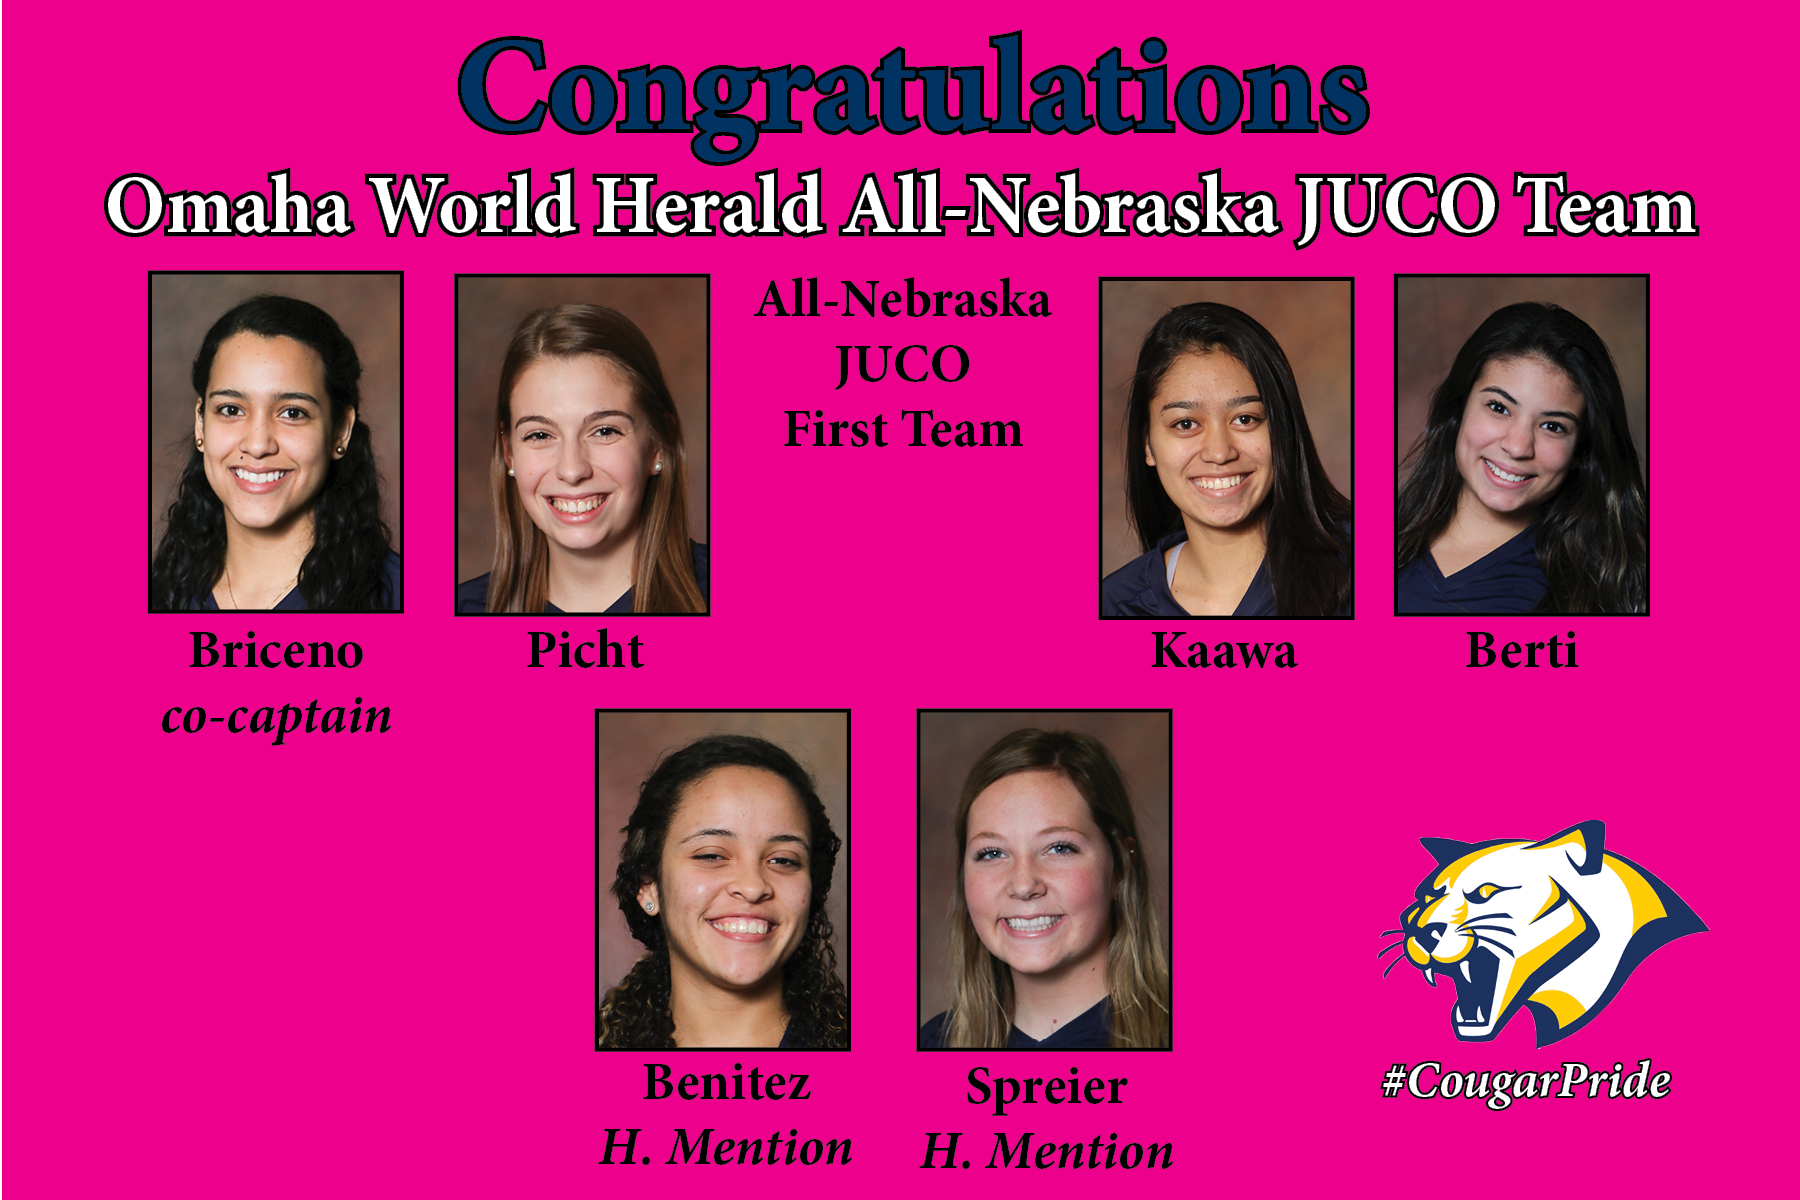 Six WNCC volleyball players placed on OWH All-Nebraska JUCO team